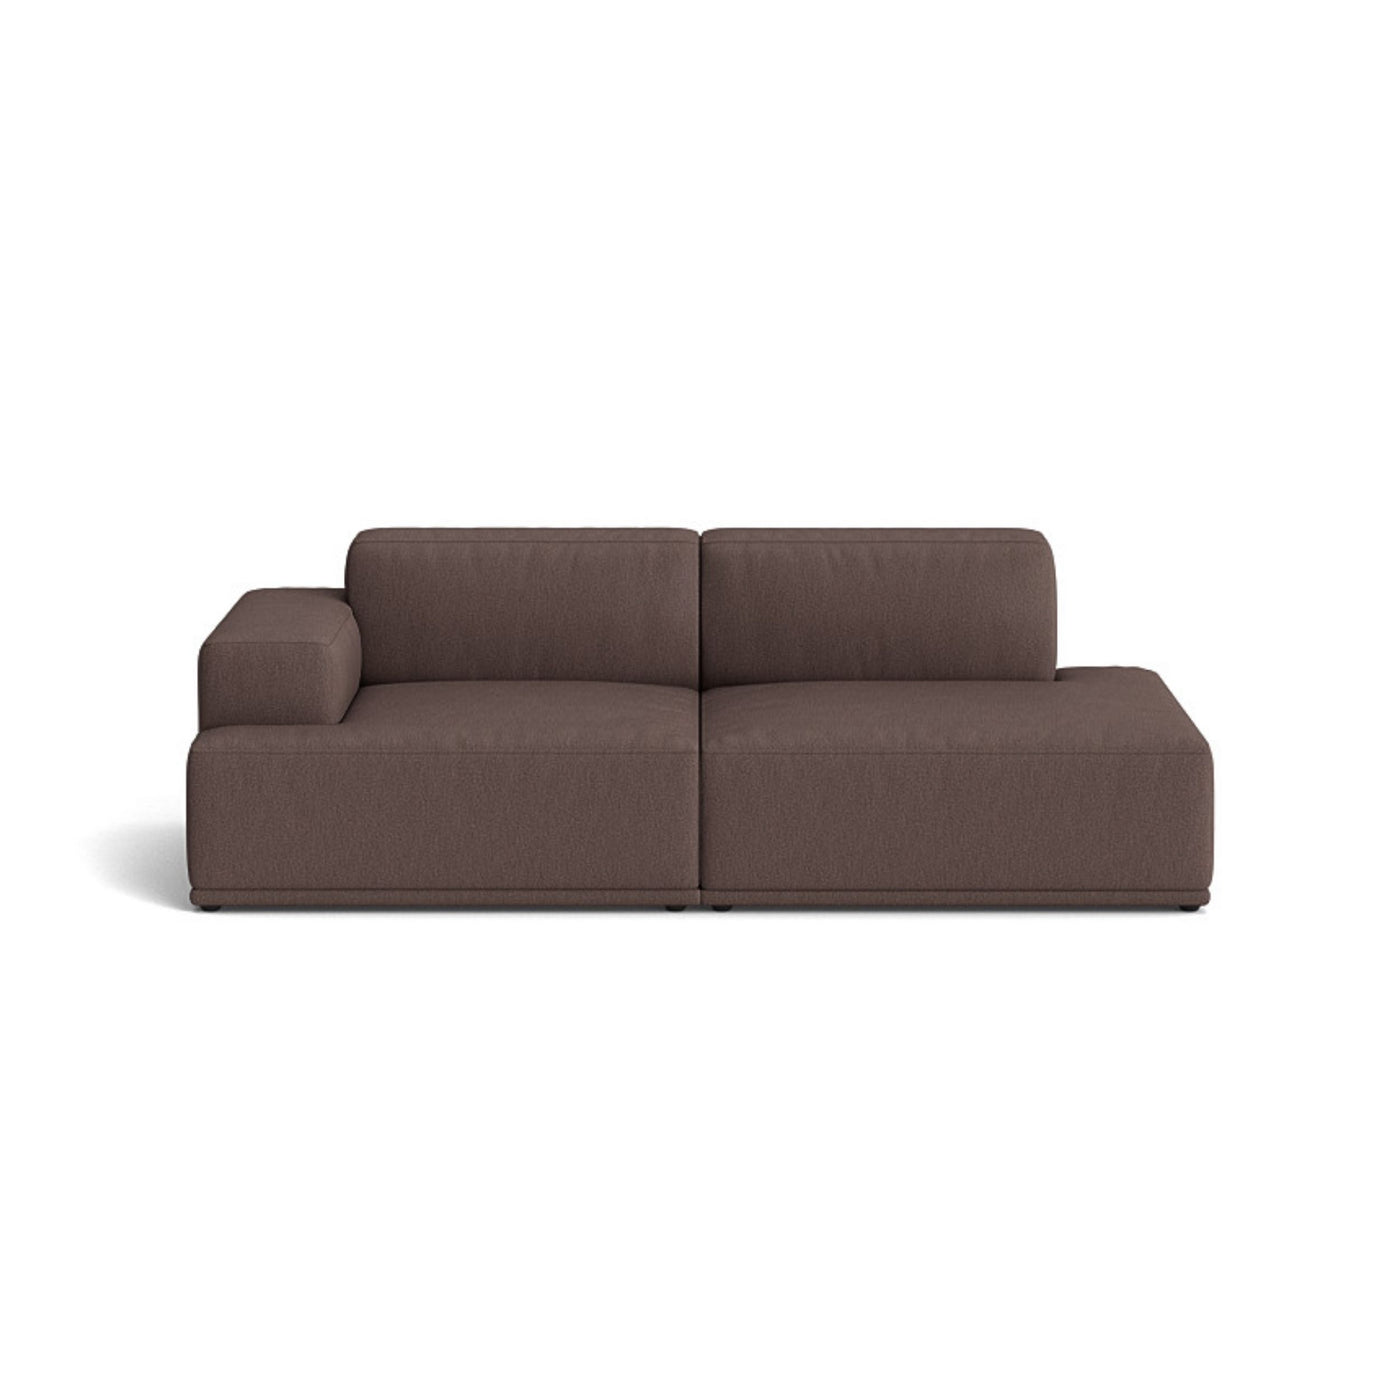 Muuto Connect Soft Modular 2 Seater Sofa, configuration 2. made-to-order from someday designs. #colour_clay-6-red-brown